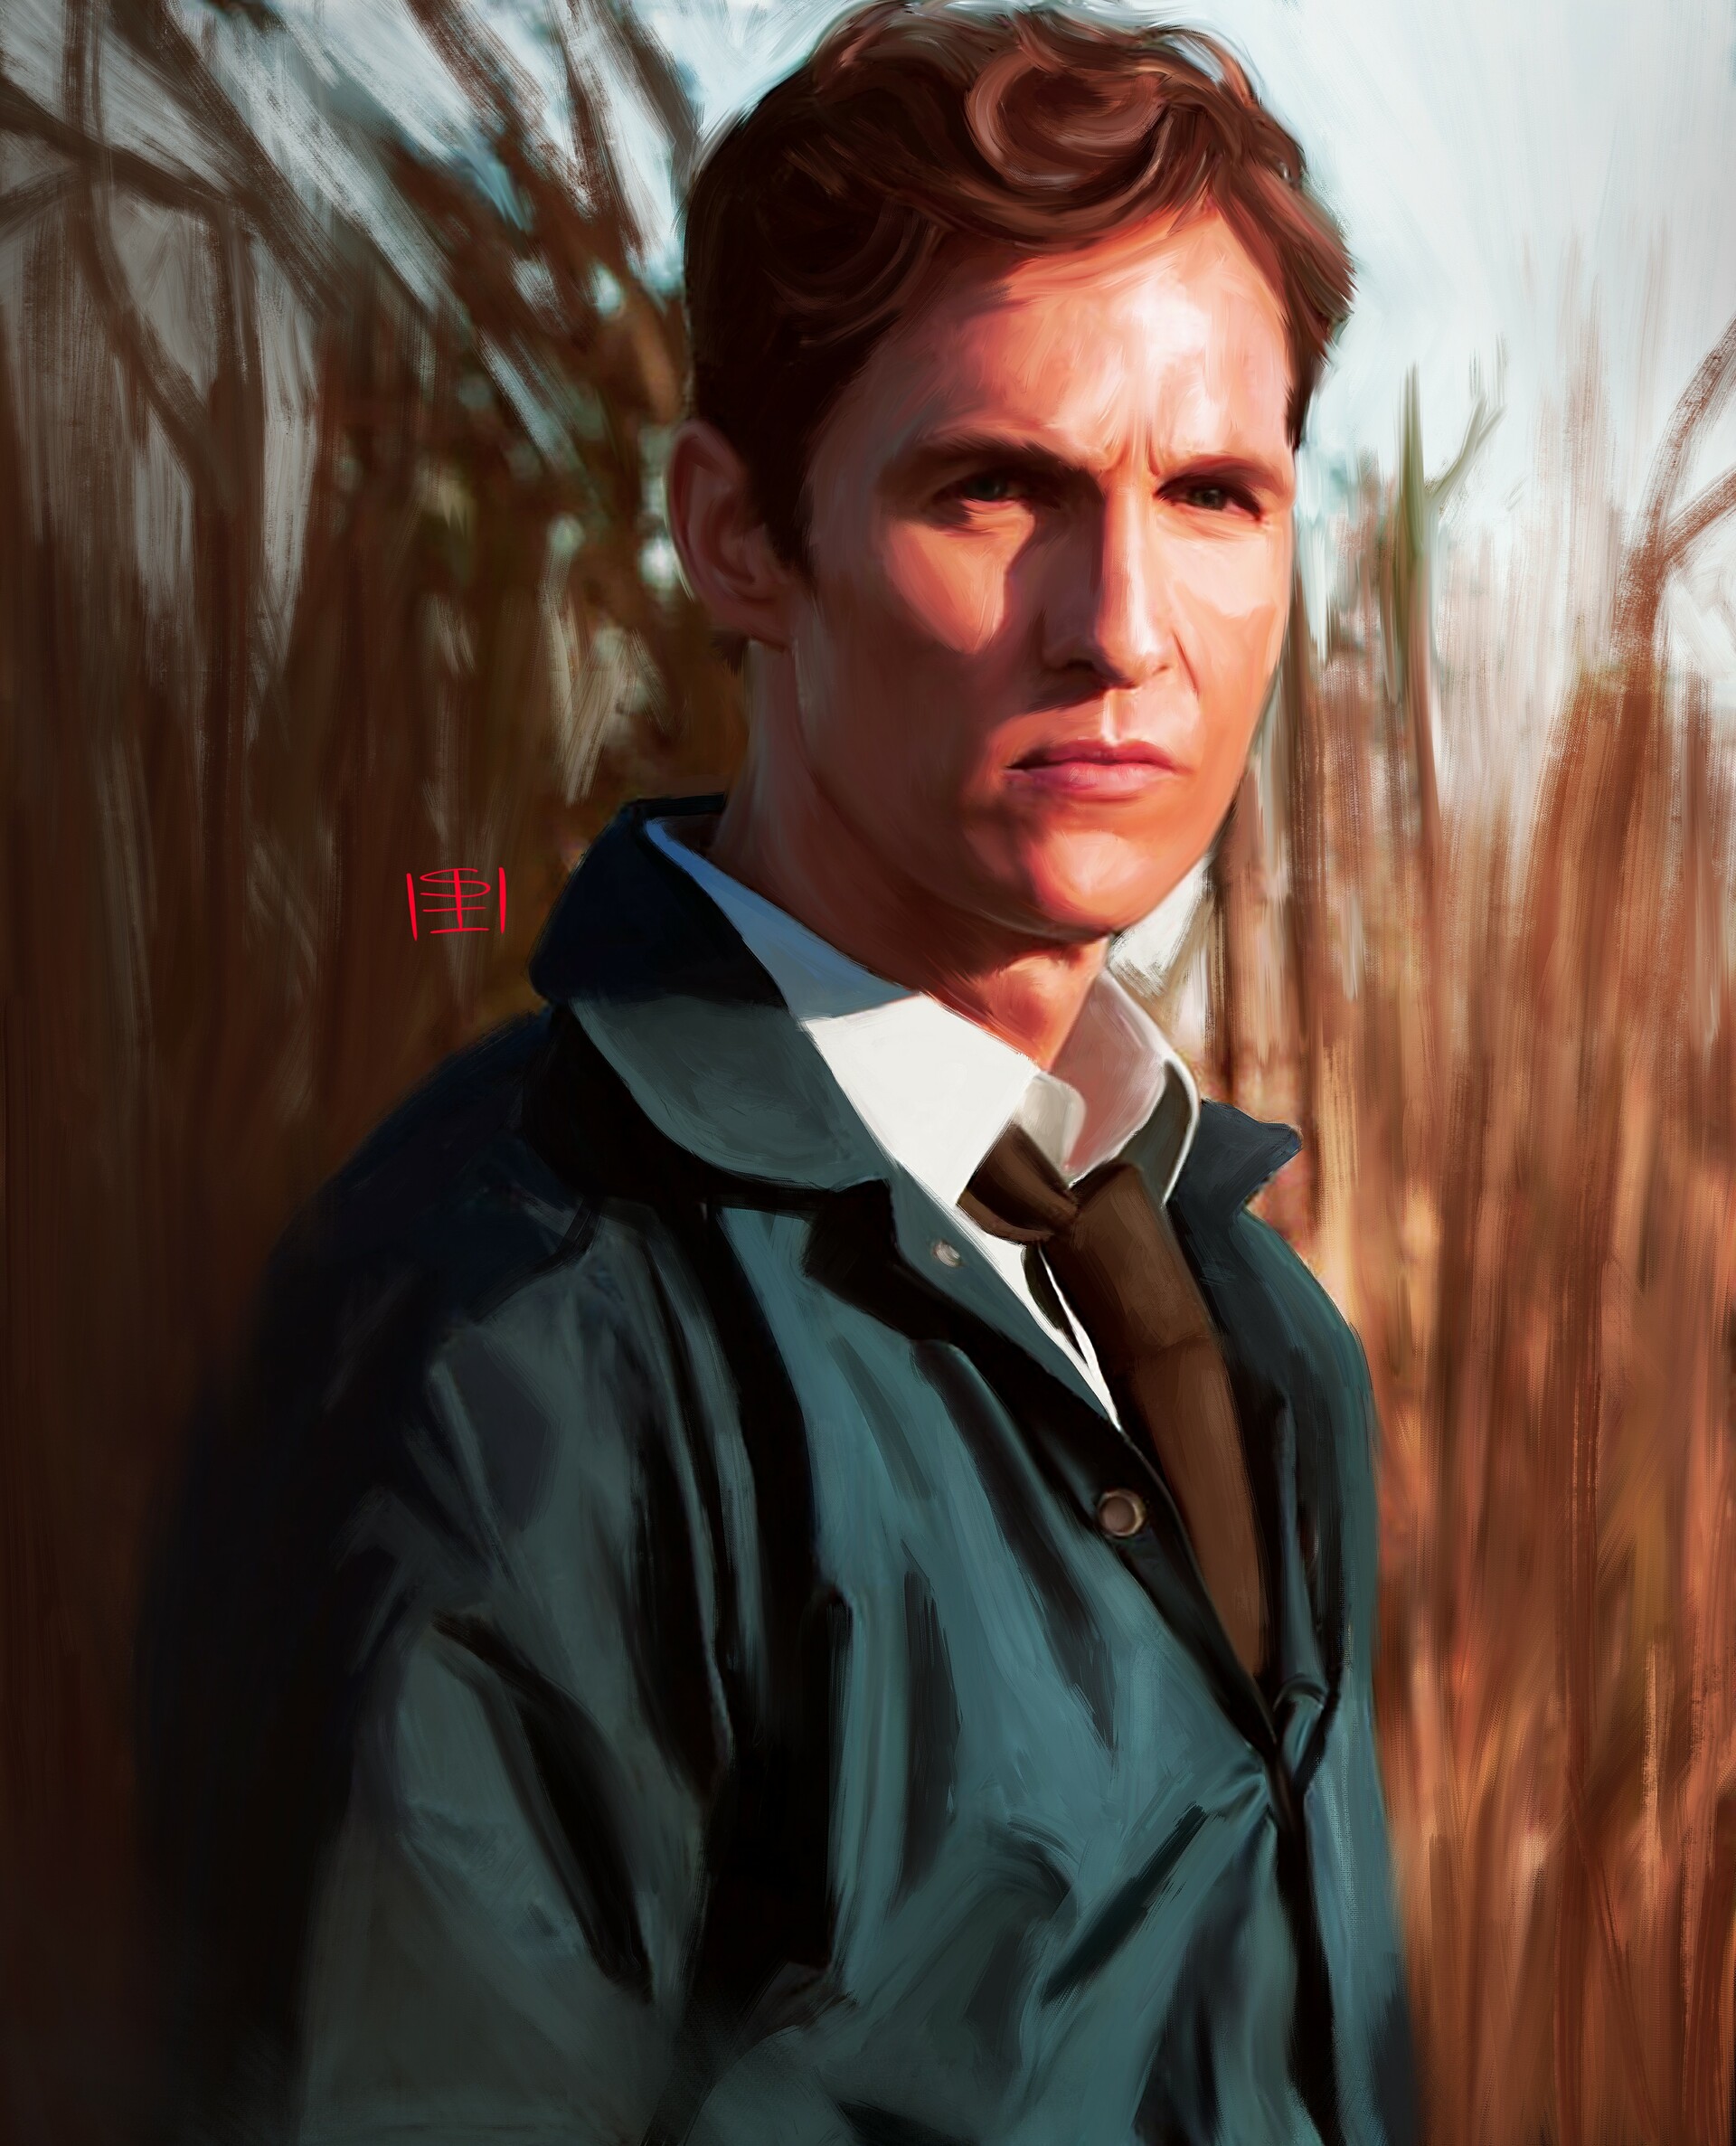 Rust and cohle фото 13